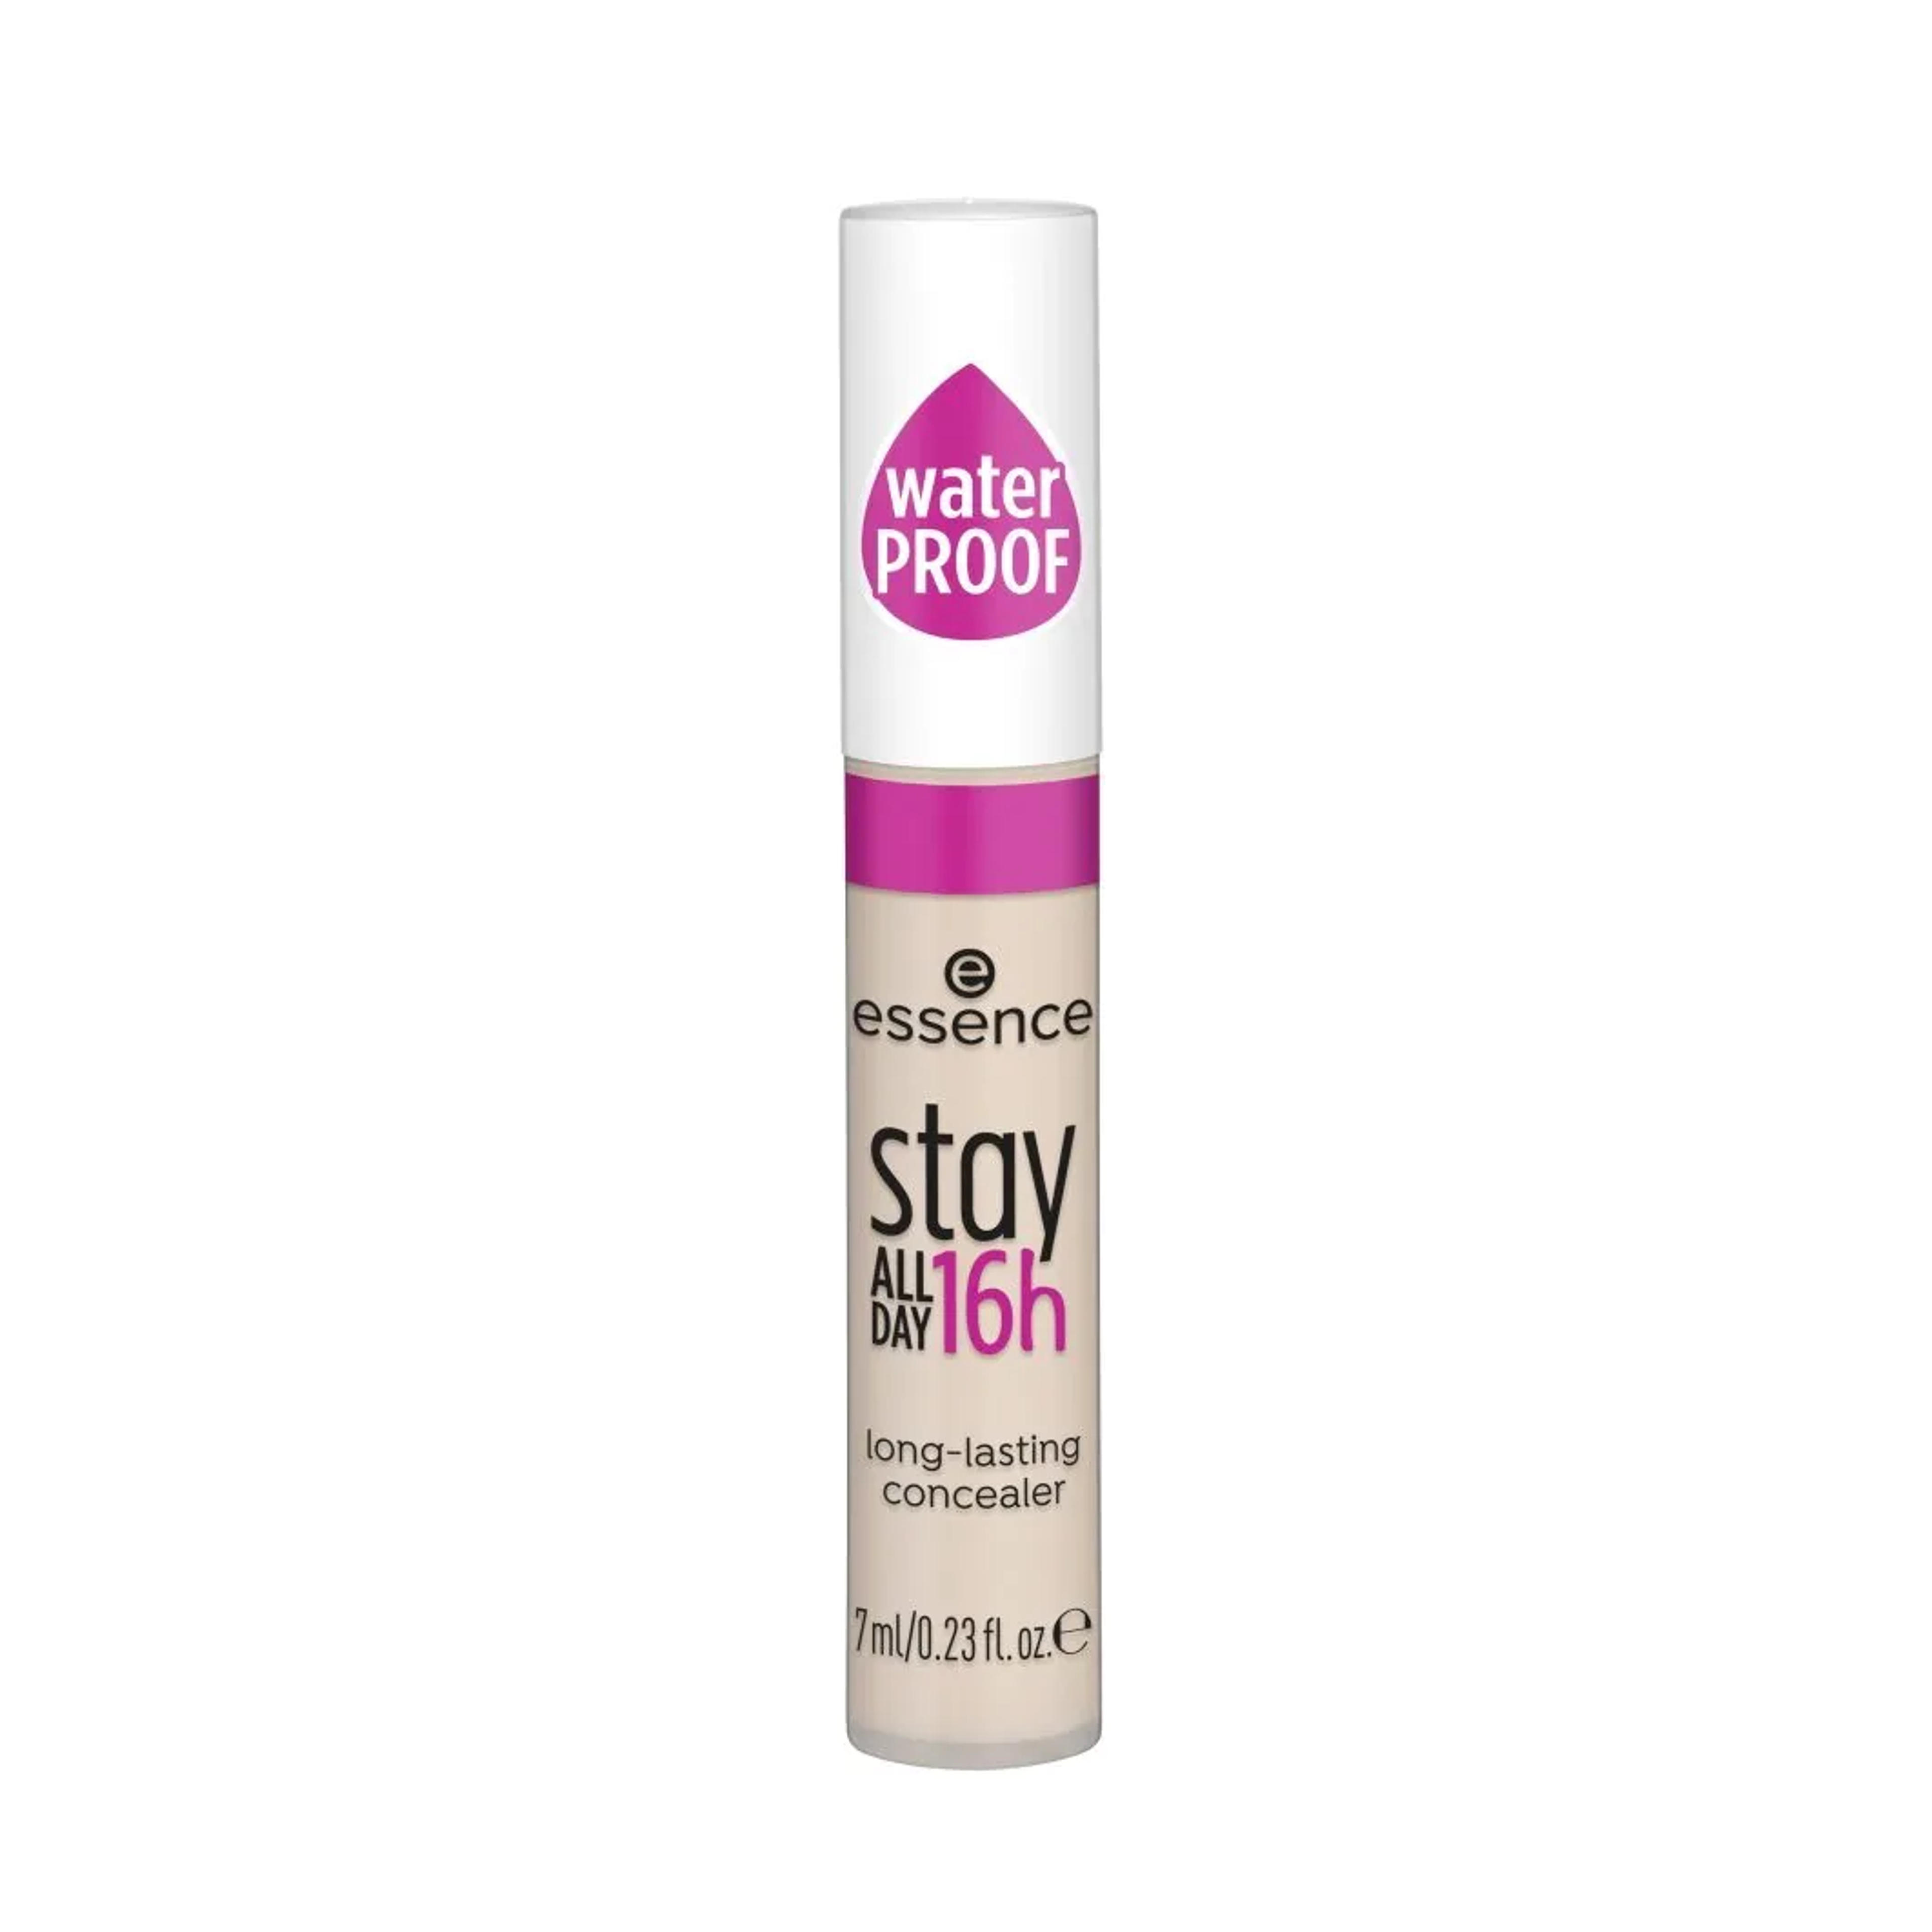 Essence Stay All Day 16h Long-lasting Concealer ✔️ online kaufen | DOUGLAS